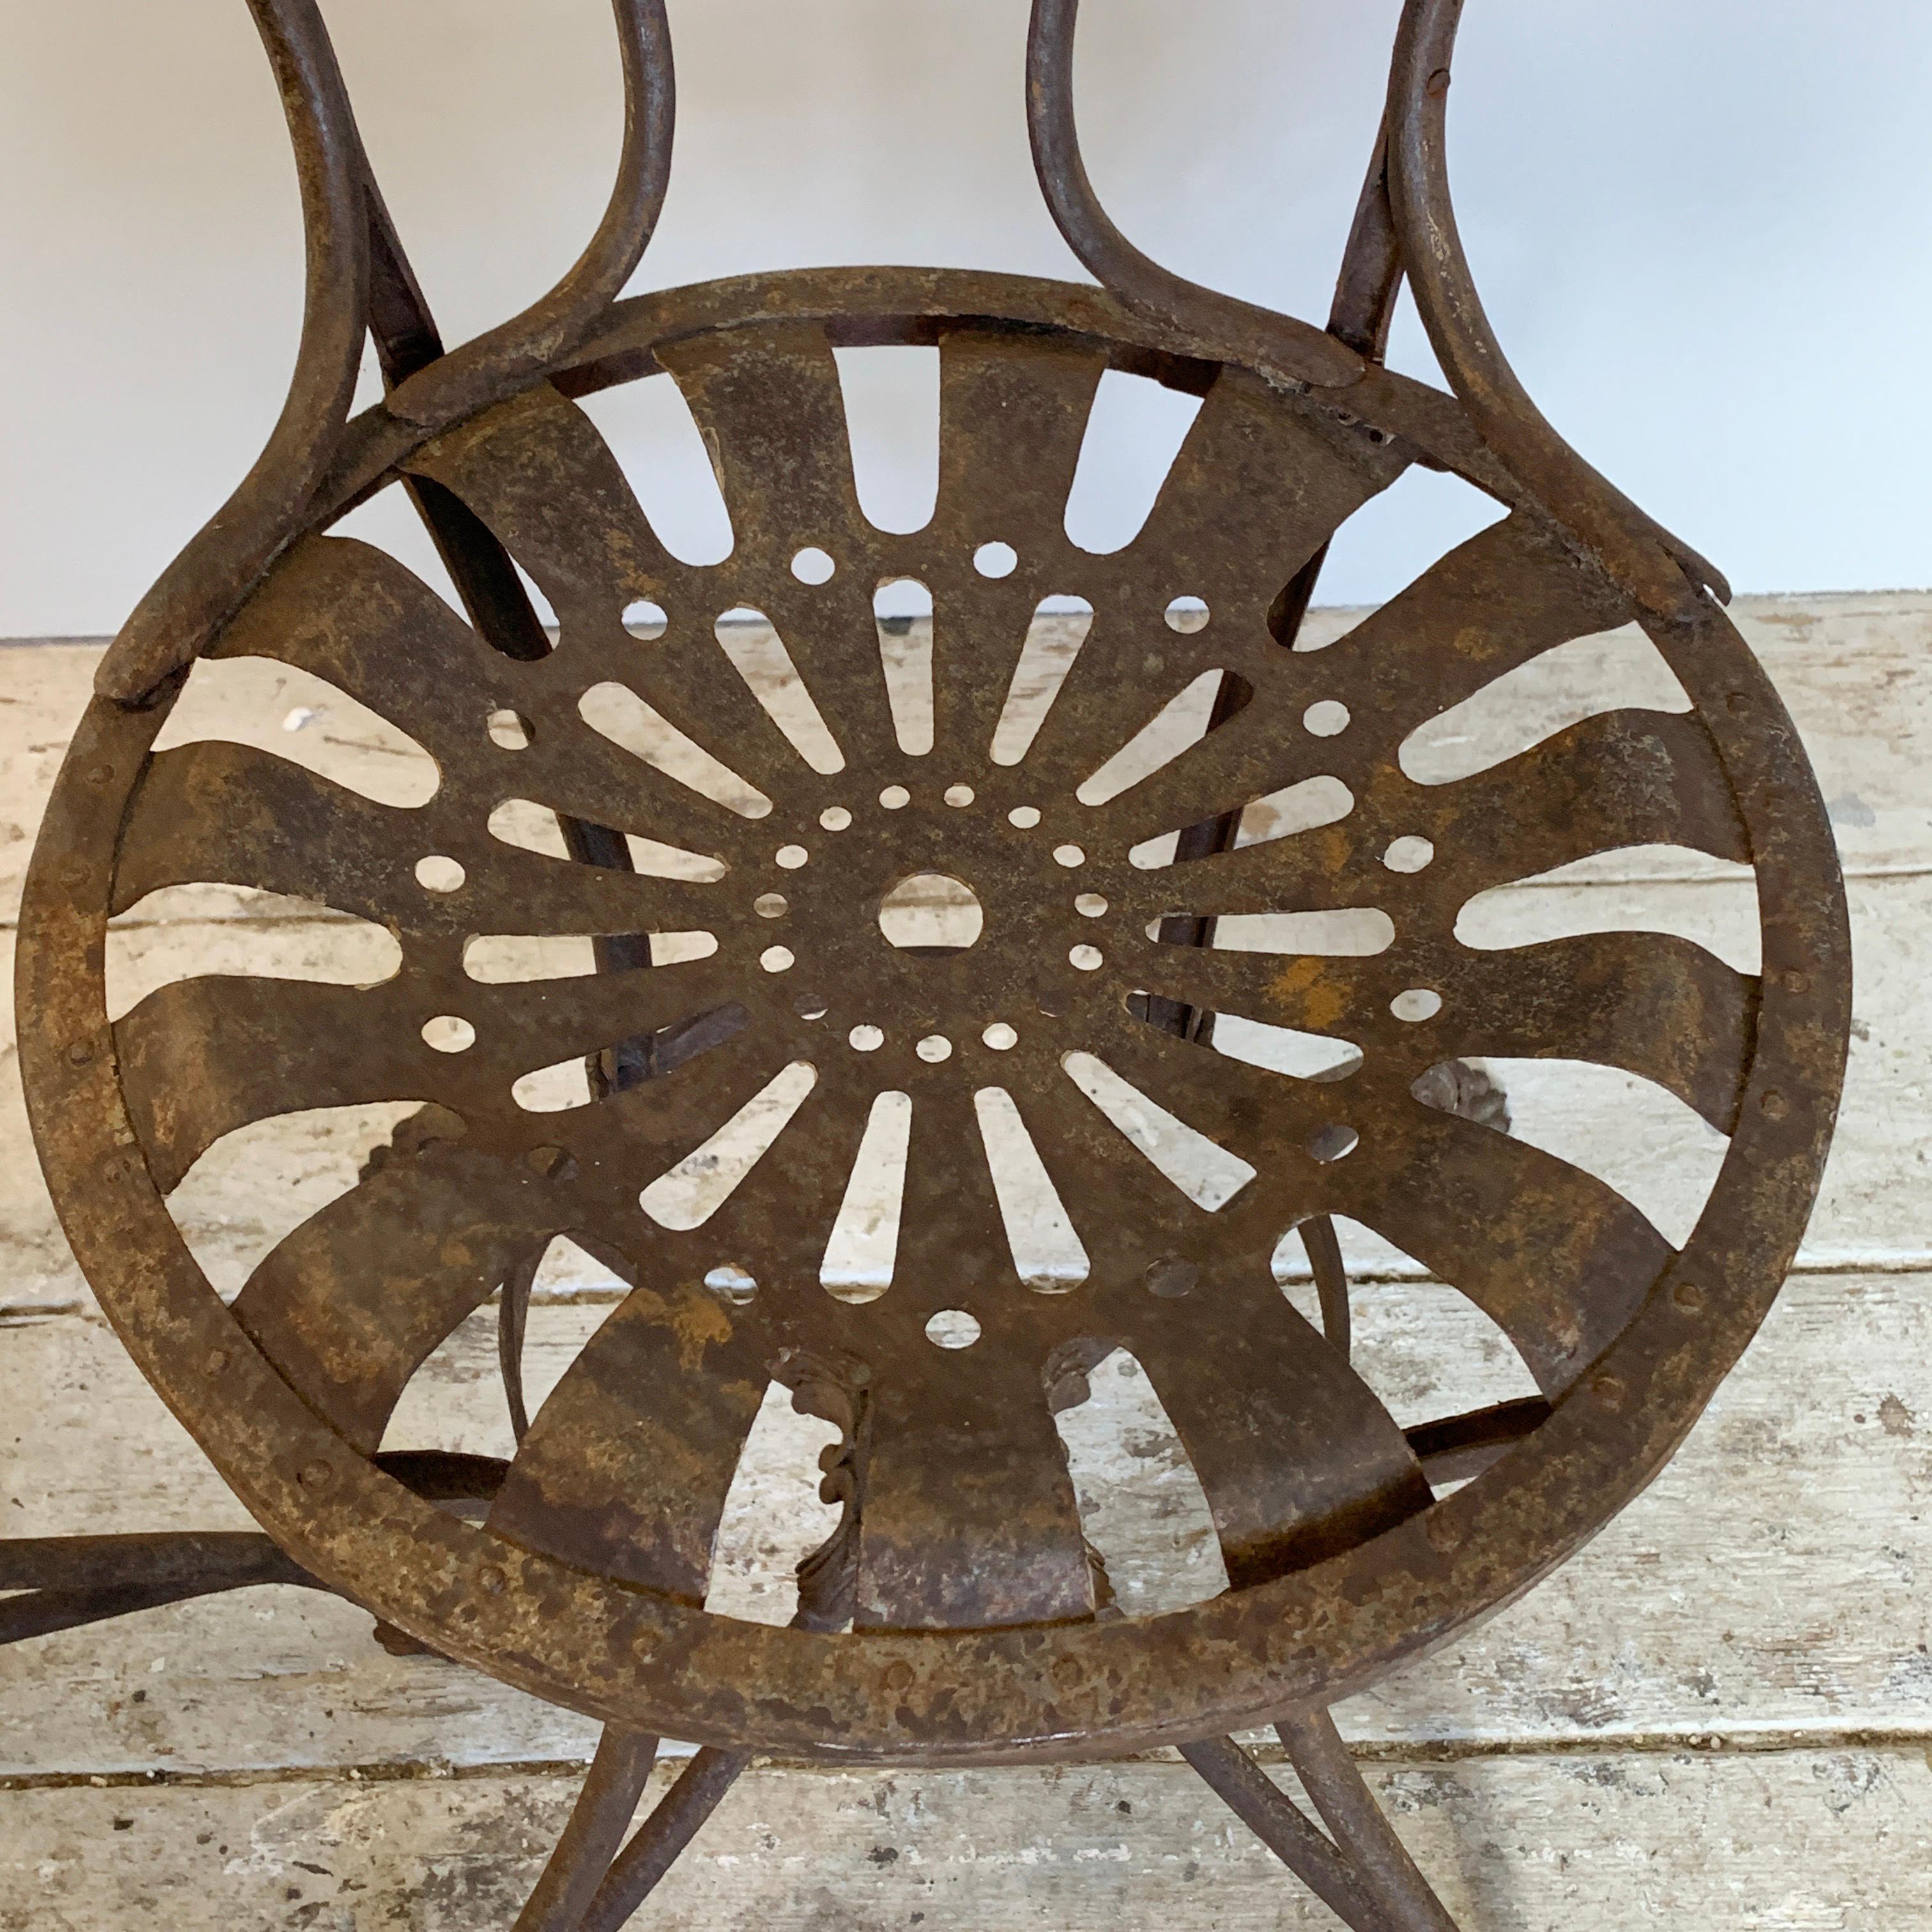 A rare pair of late 19th century French arras garden chairs
These chairs show the makers mark on the central casting between the legs, 'Grassin Brevete S.G.D.G arras'
The chairs are late 19th century, circa 1880s
They show the classic and